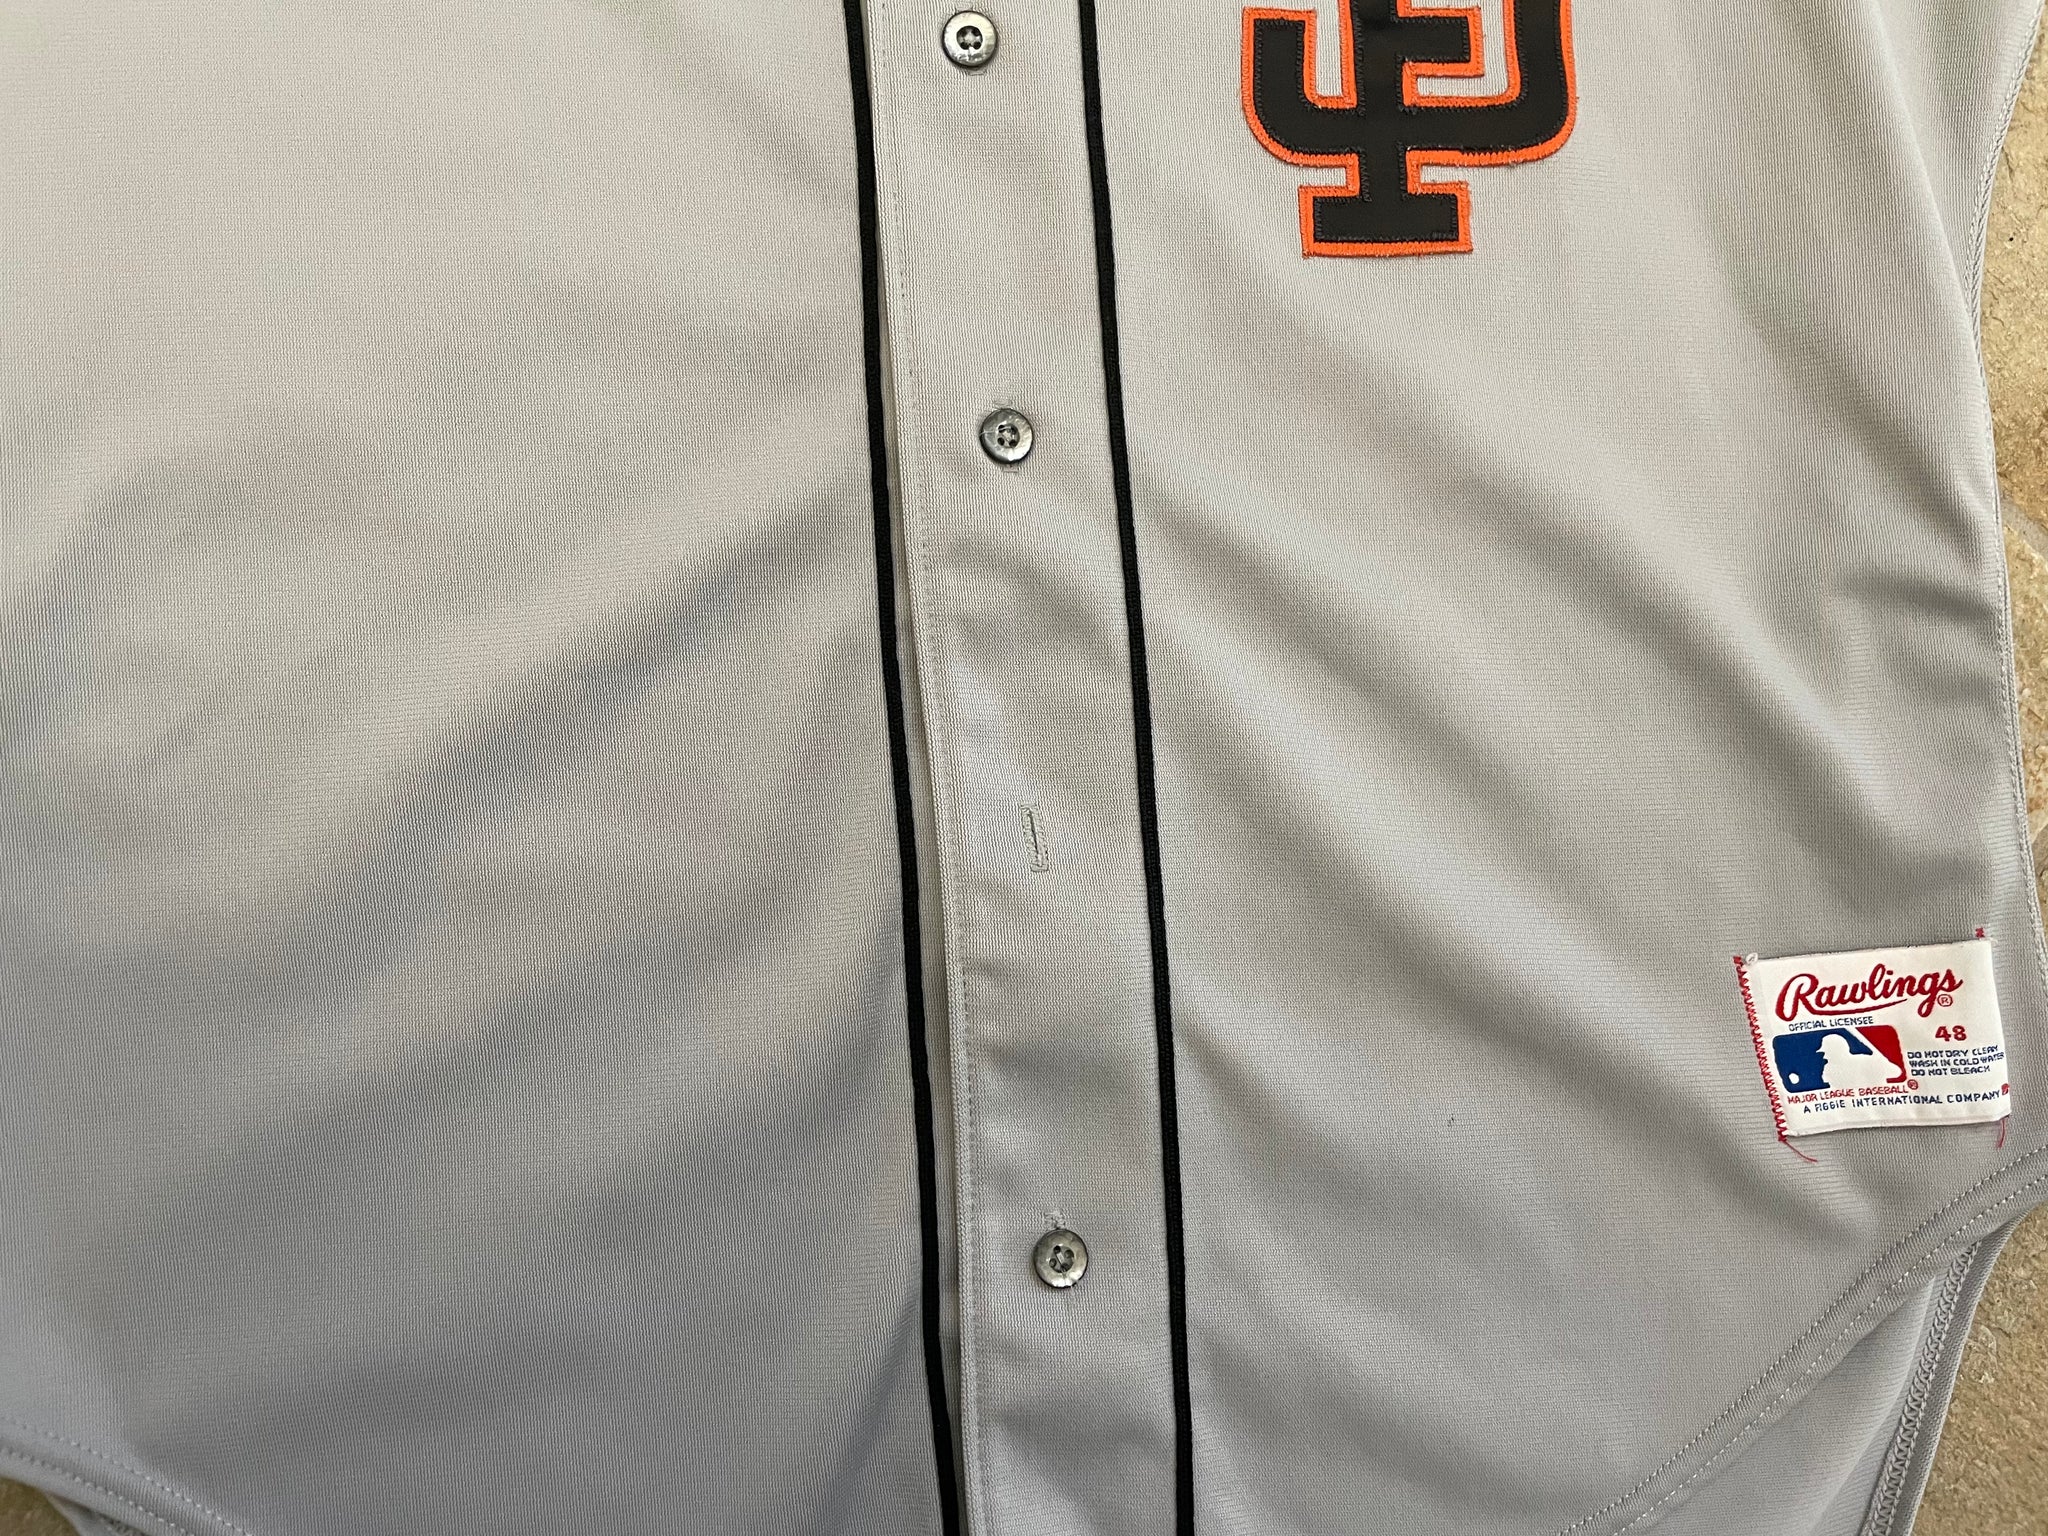 San Francisco Giants Off the bench vintage jersey size large